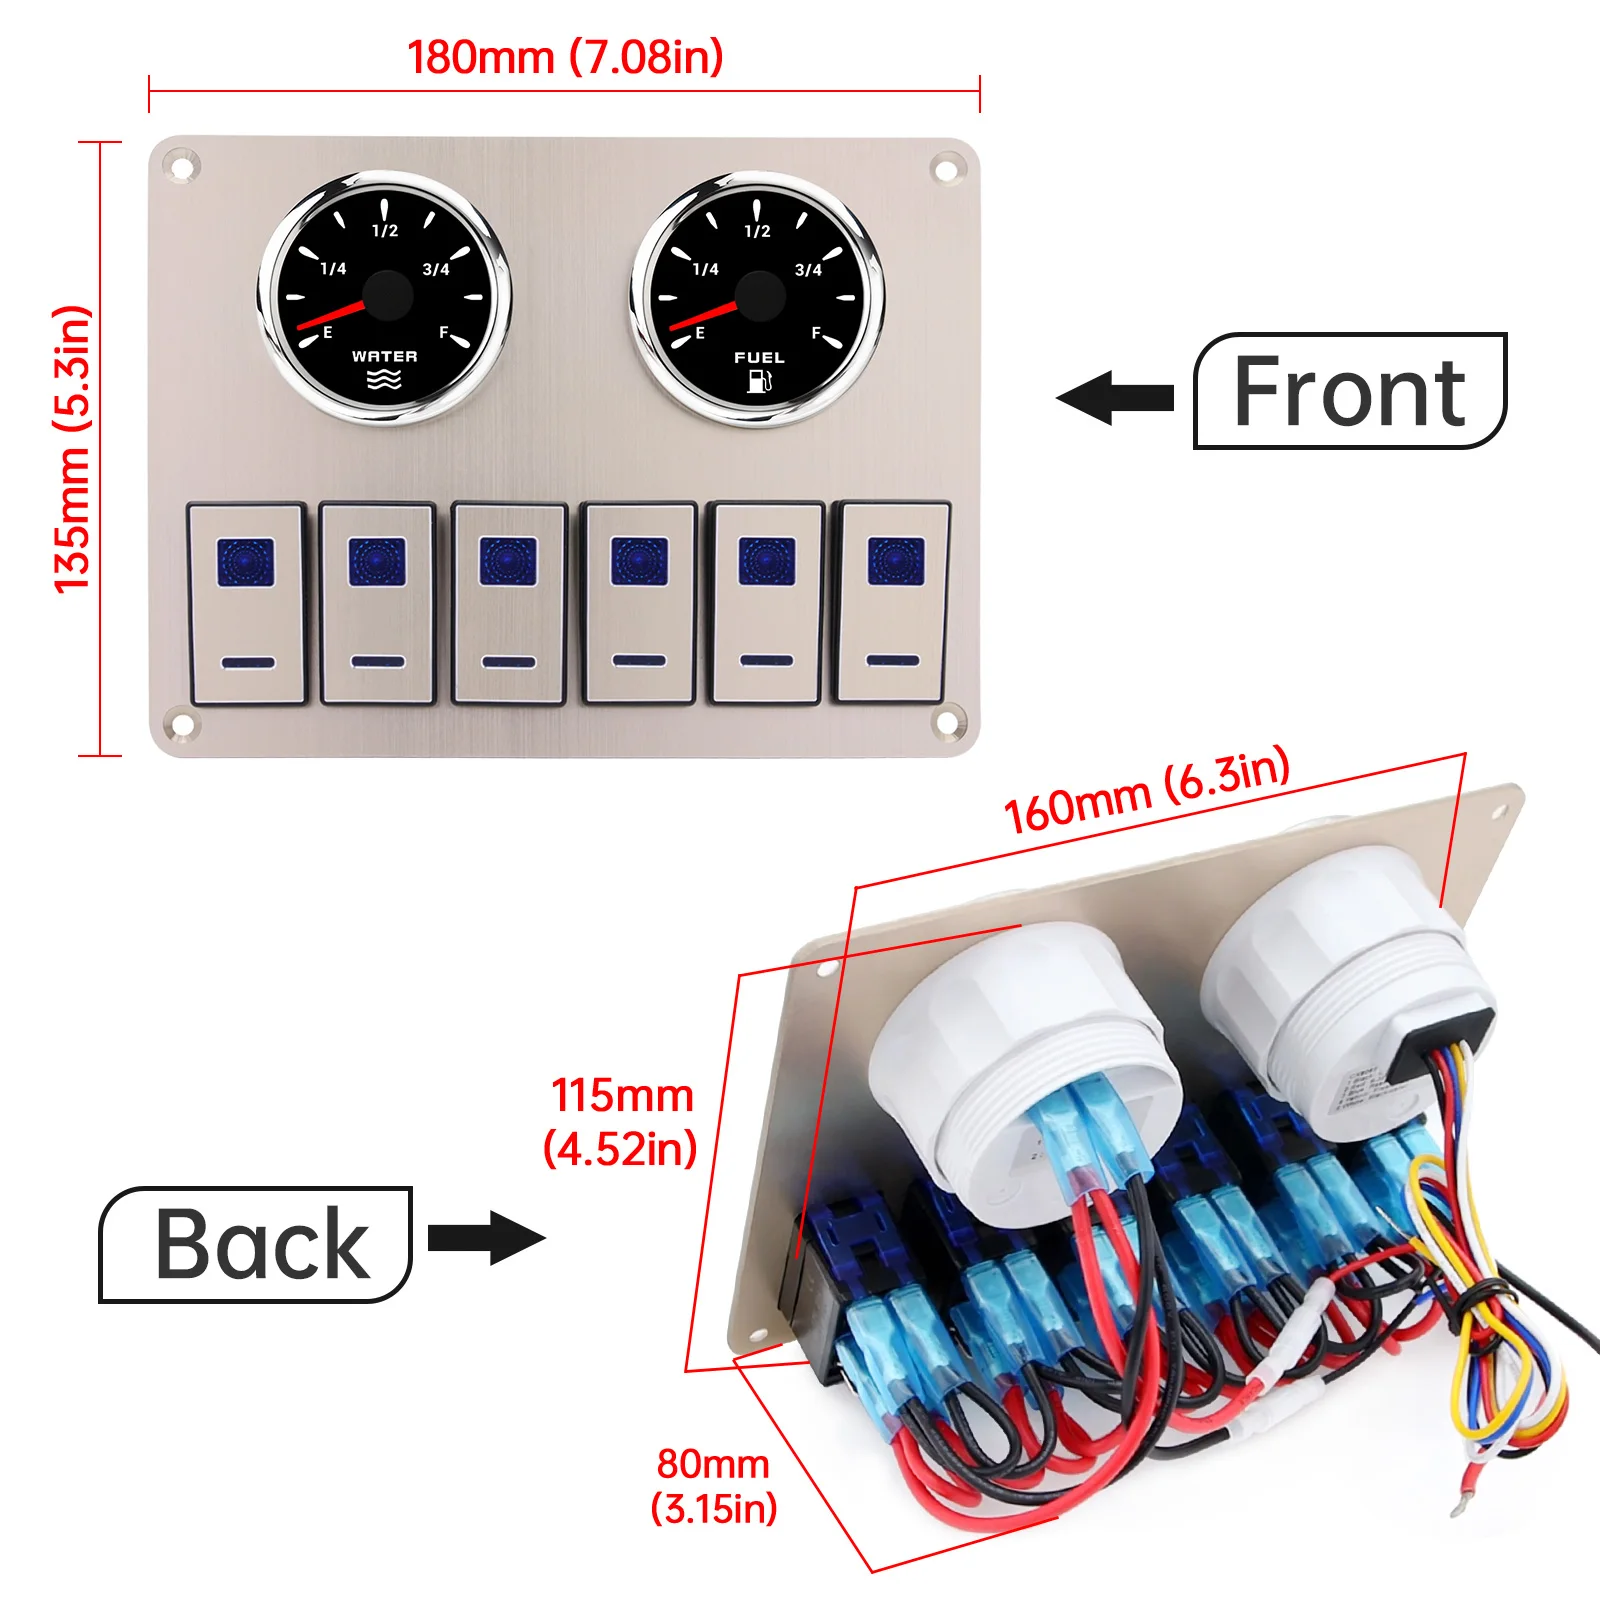 

12V/24V Rocker Switch Panel For Truck Camper RV Yacht Marine With Fuel Level&Water Level Gauge 0-190/240-33ohm